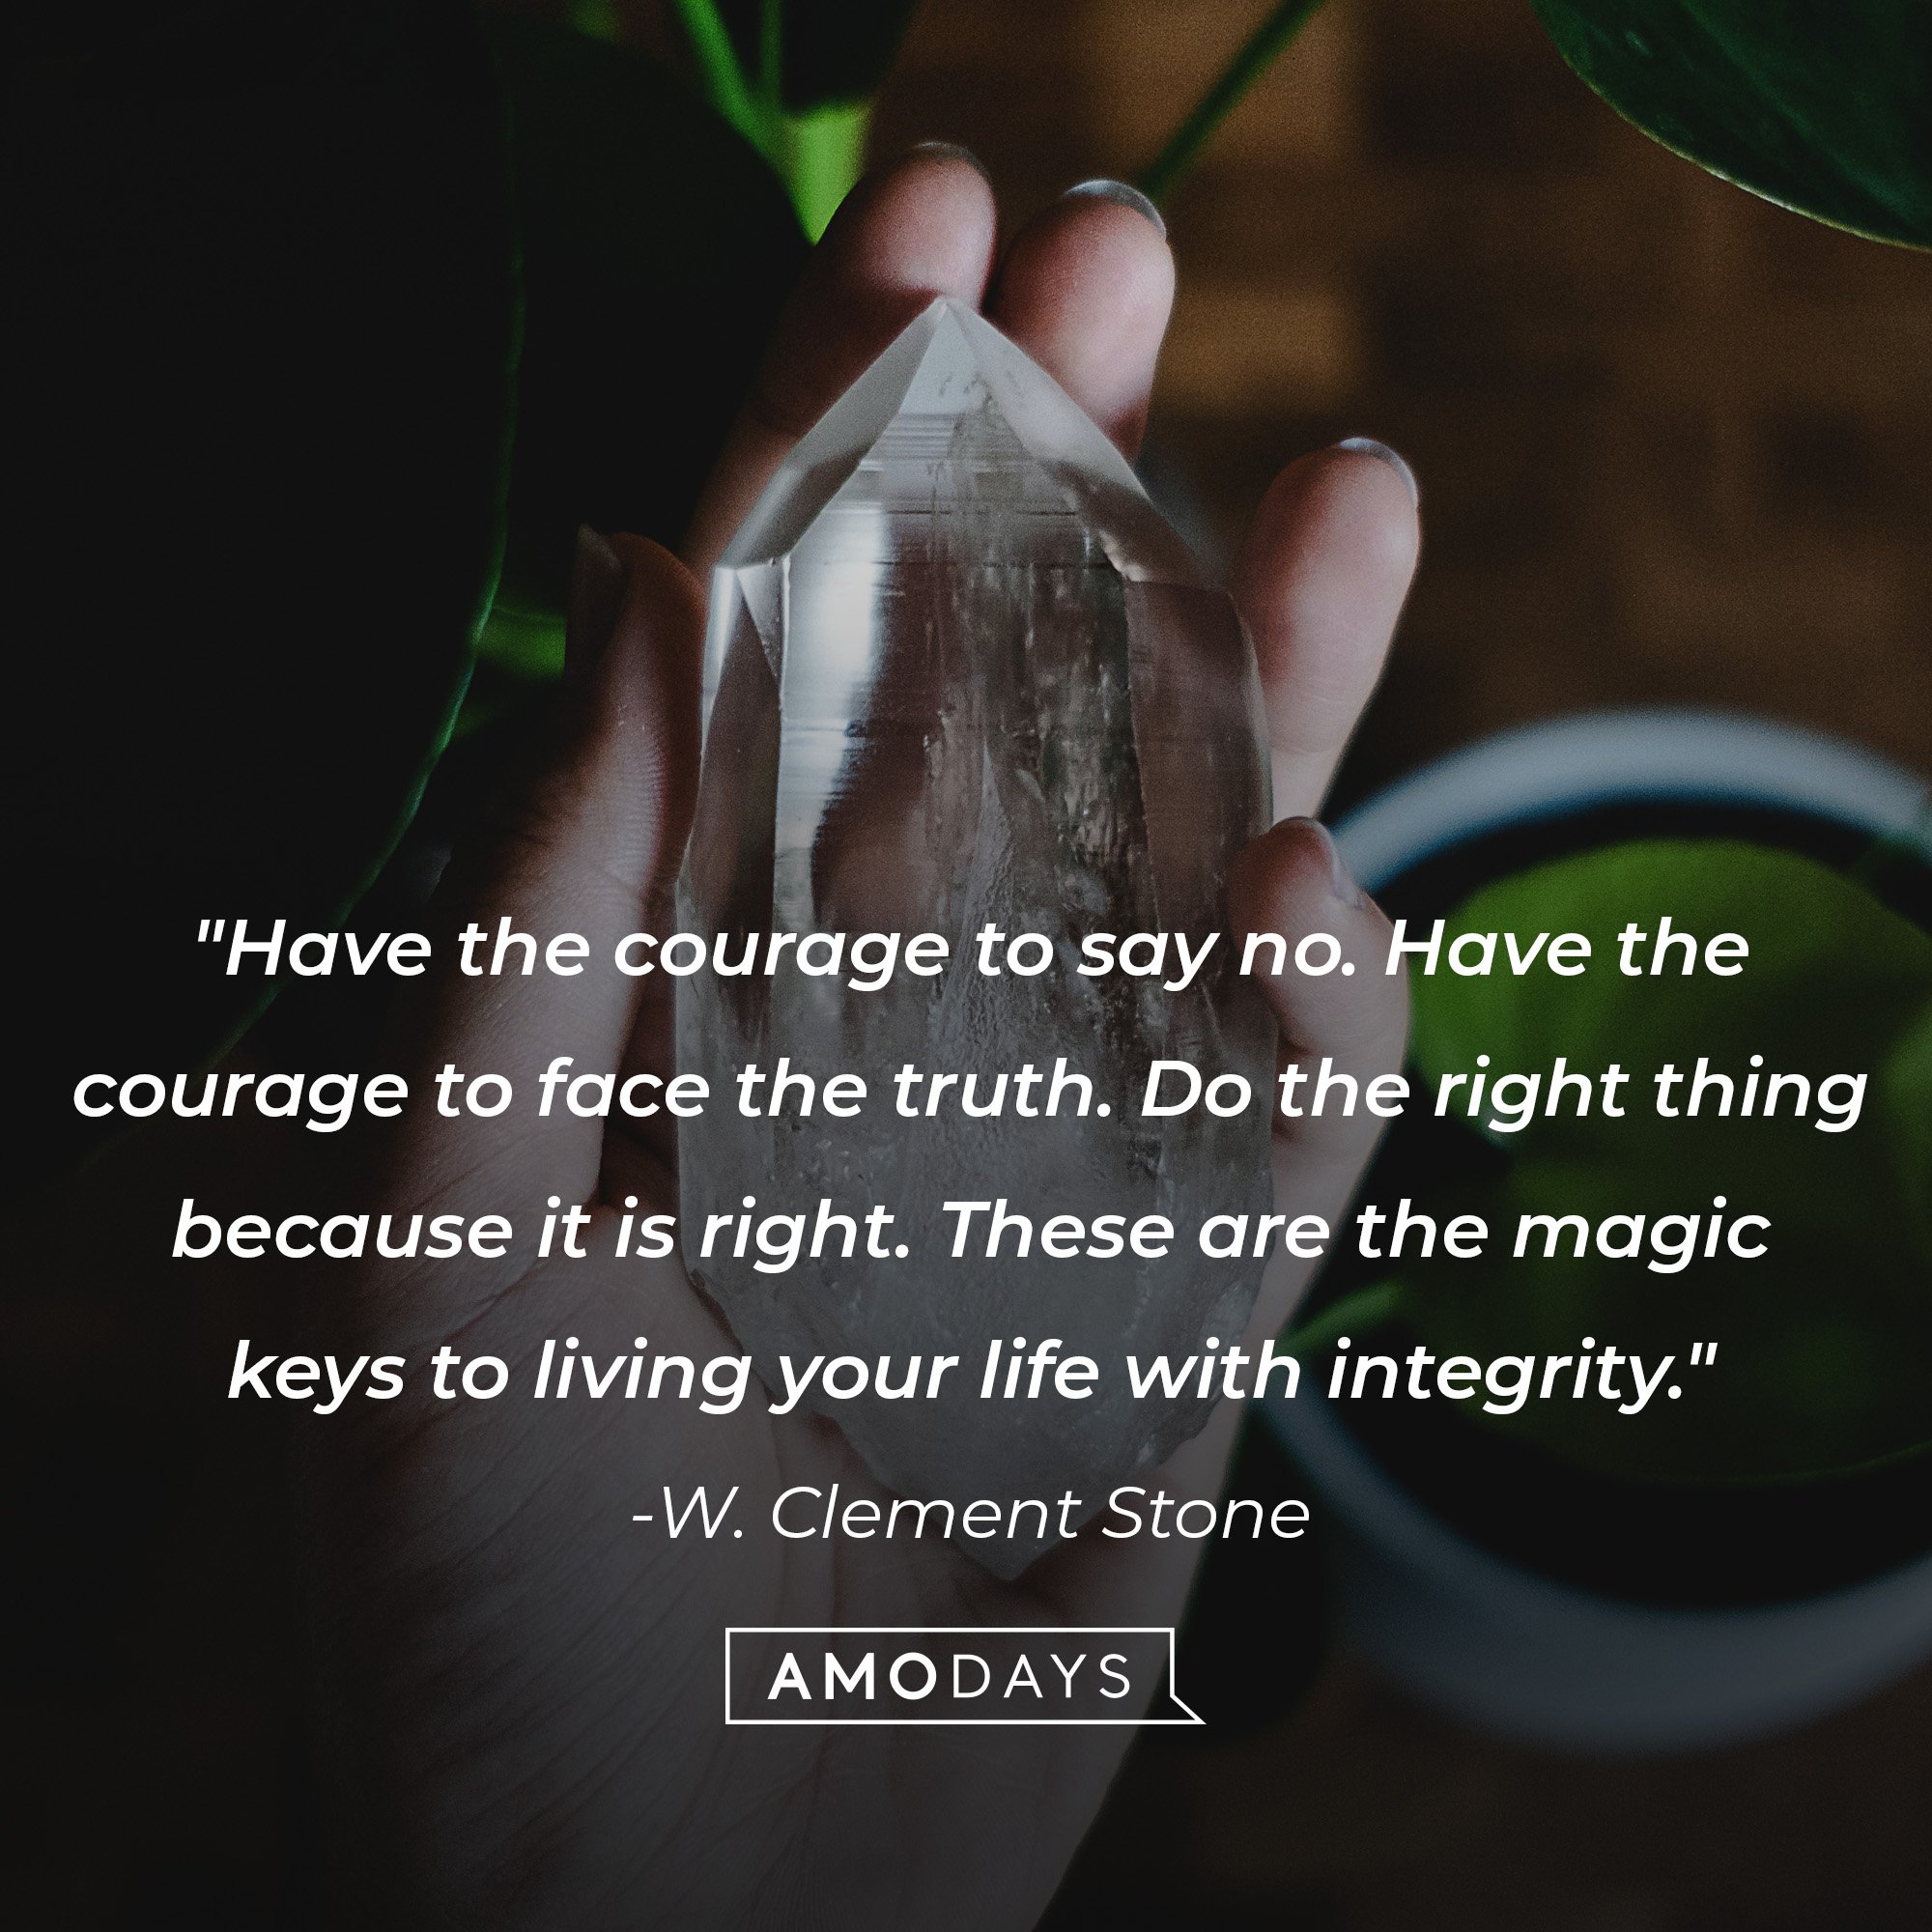  W. Clement Stone’s quote: "Have the courage to say no. Have the courage to face the truth. Do the right thing because it is right. These are the magic keys to living your life with integrity." | Image: AmoDays